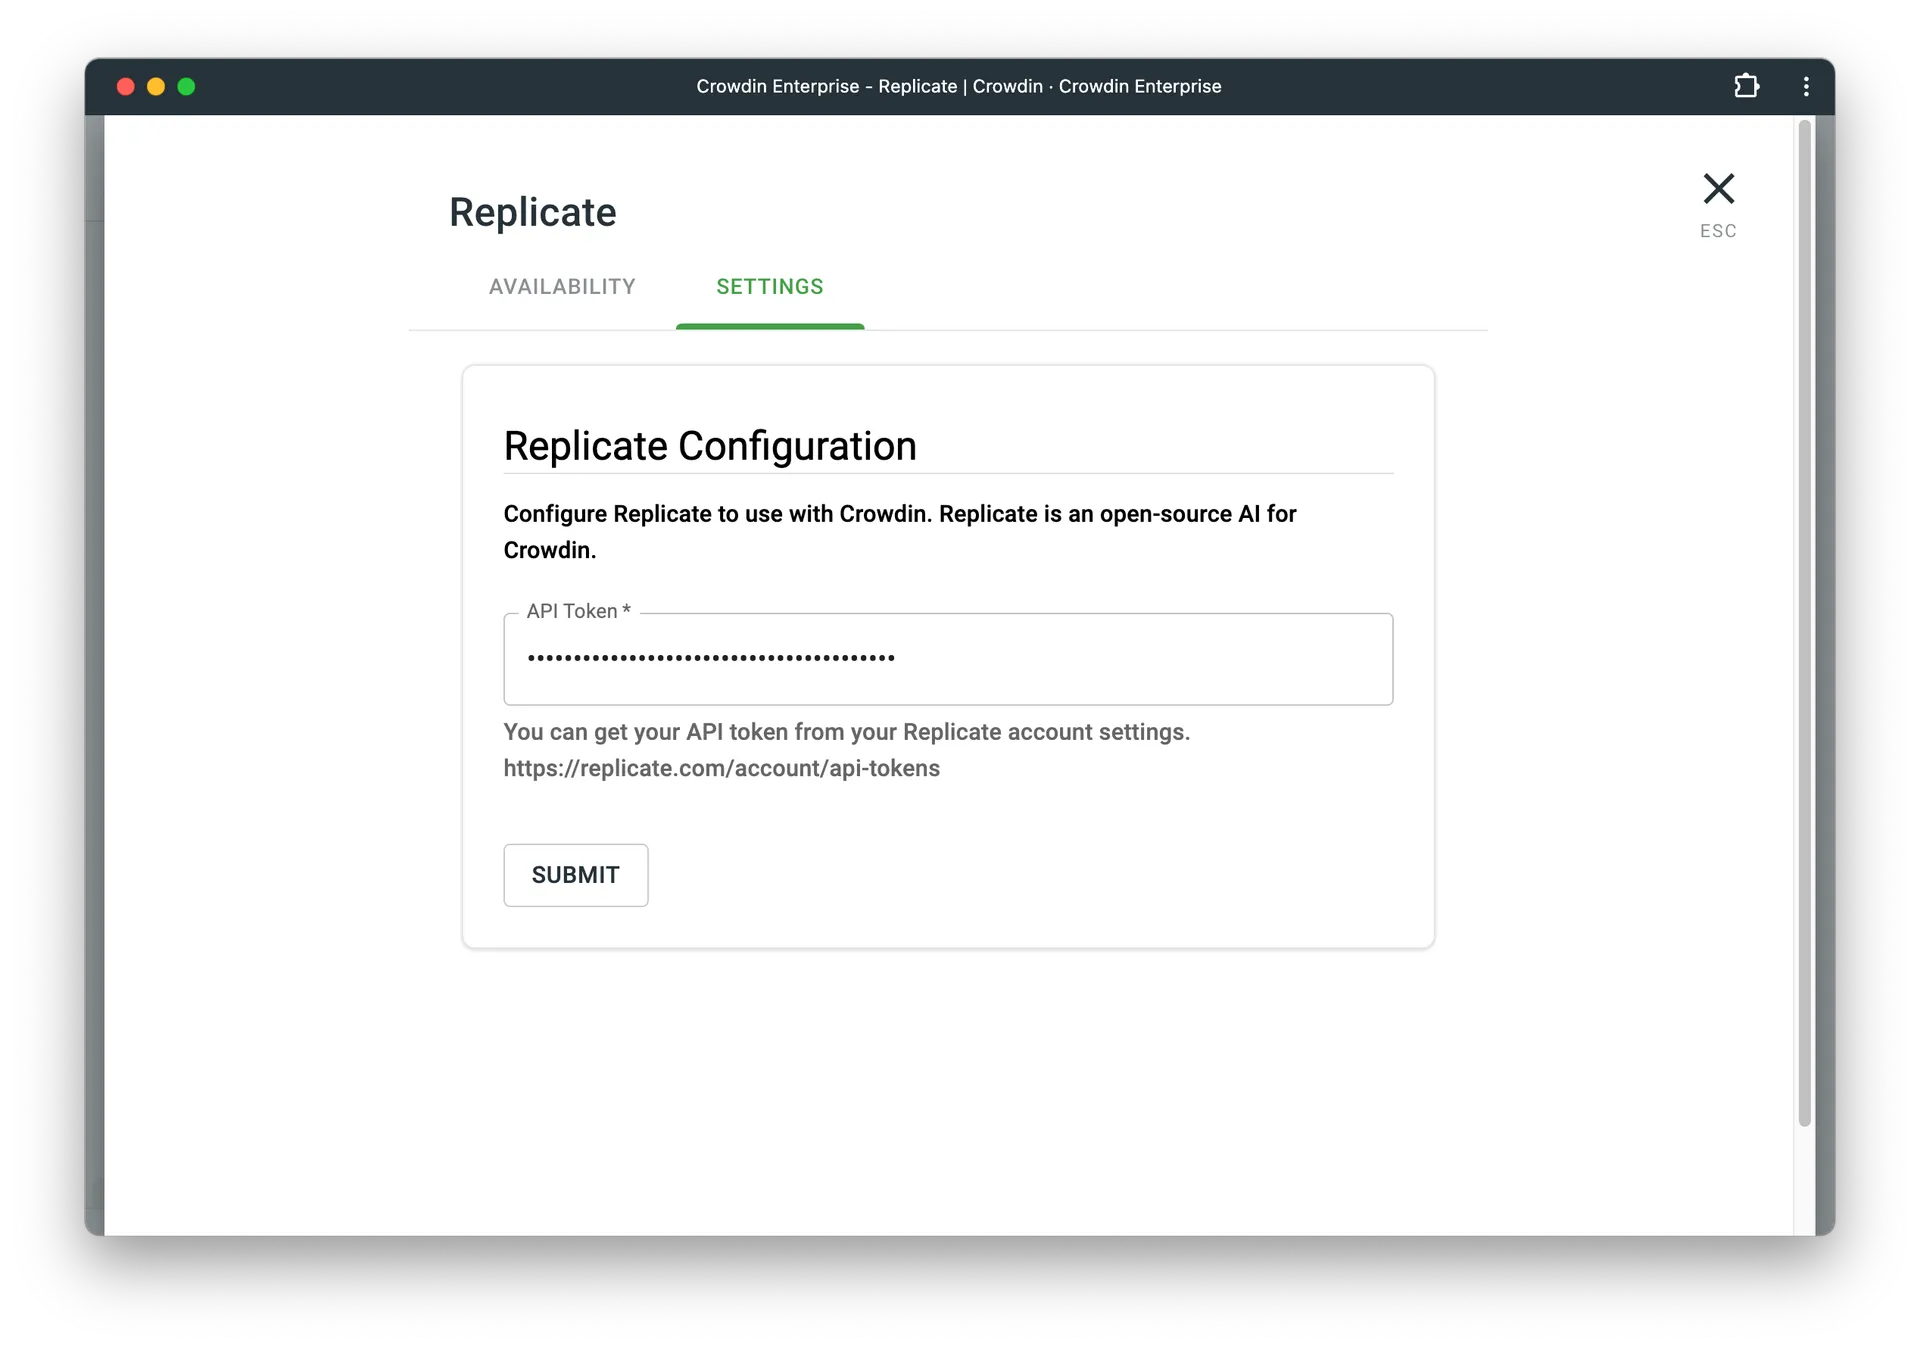 Configuring Replicate connection in Crowdin